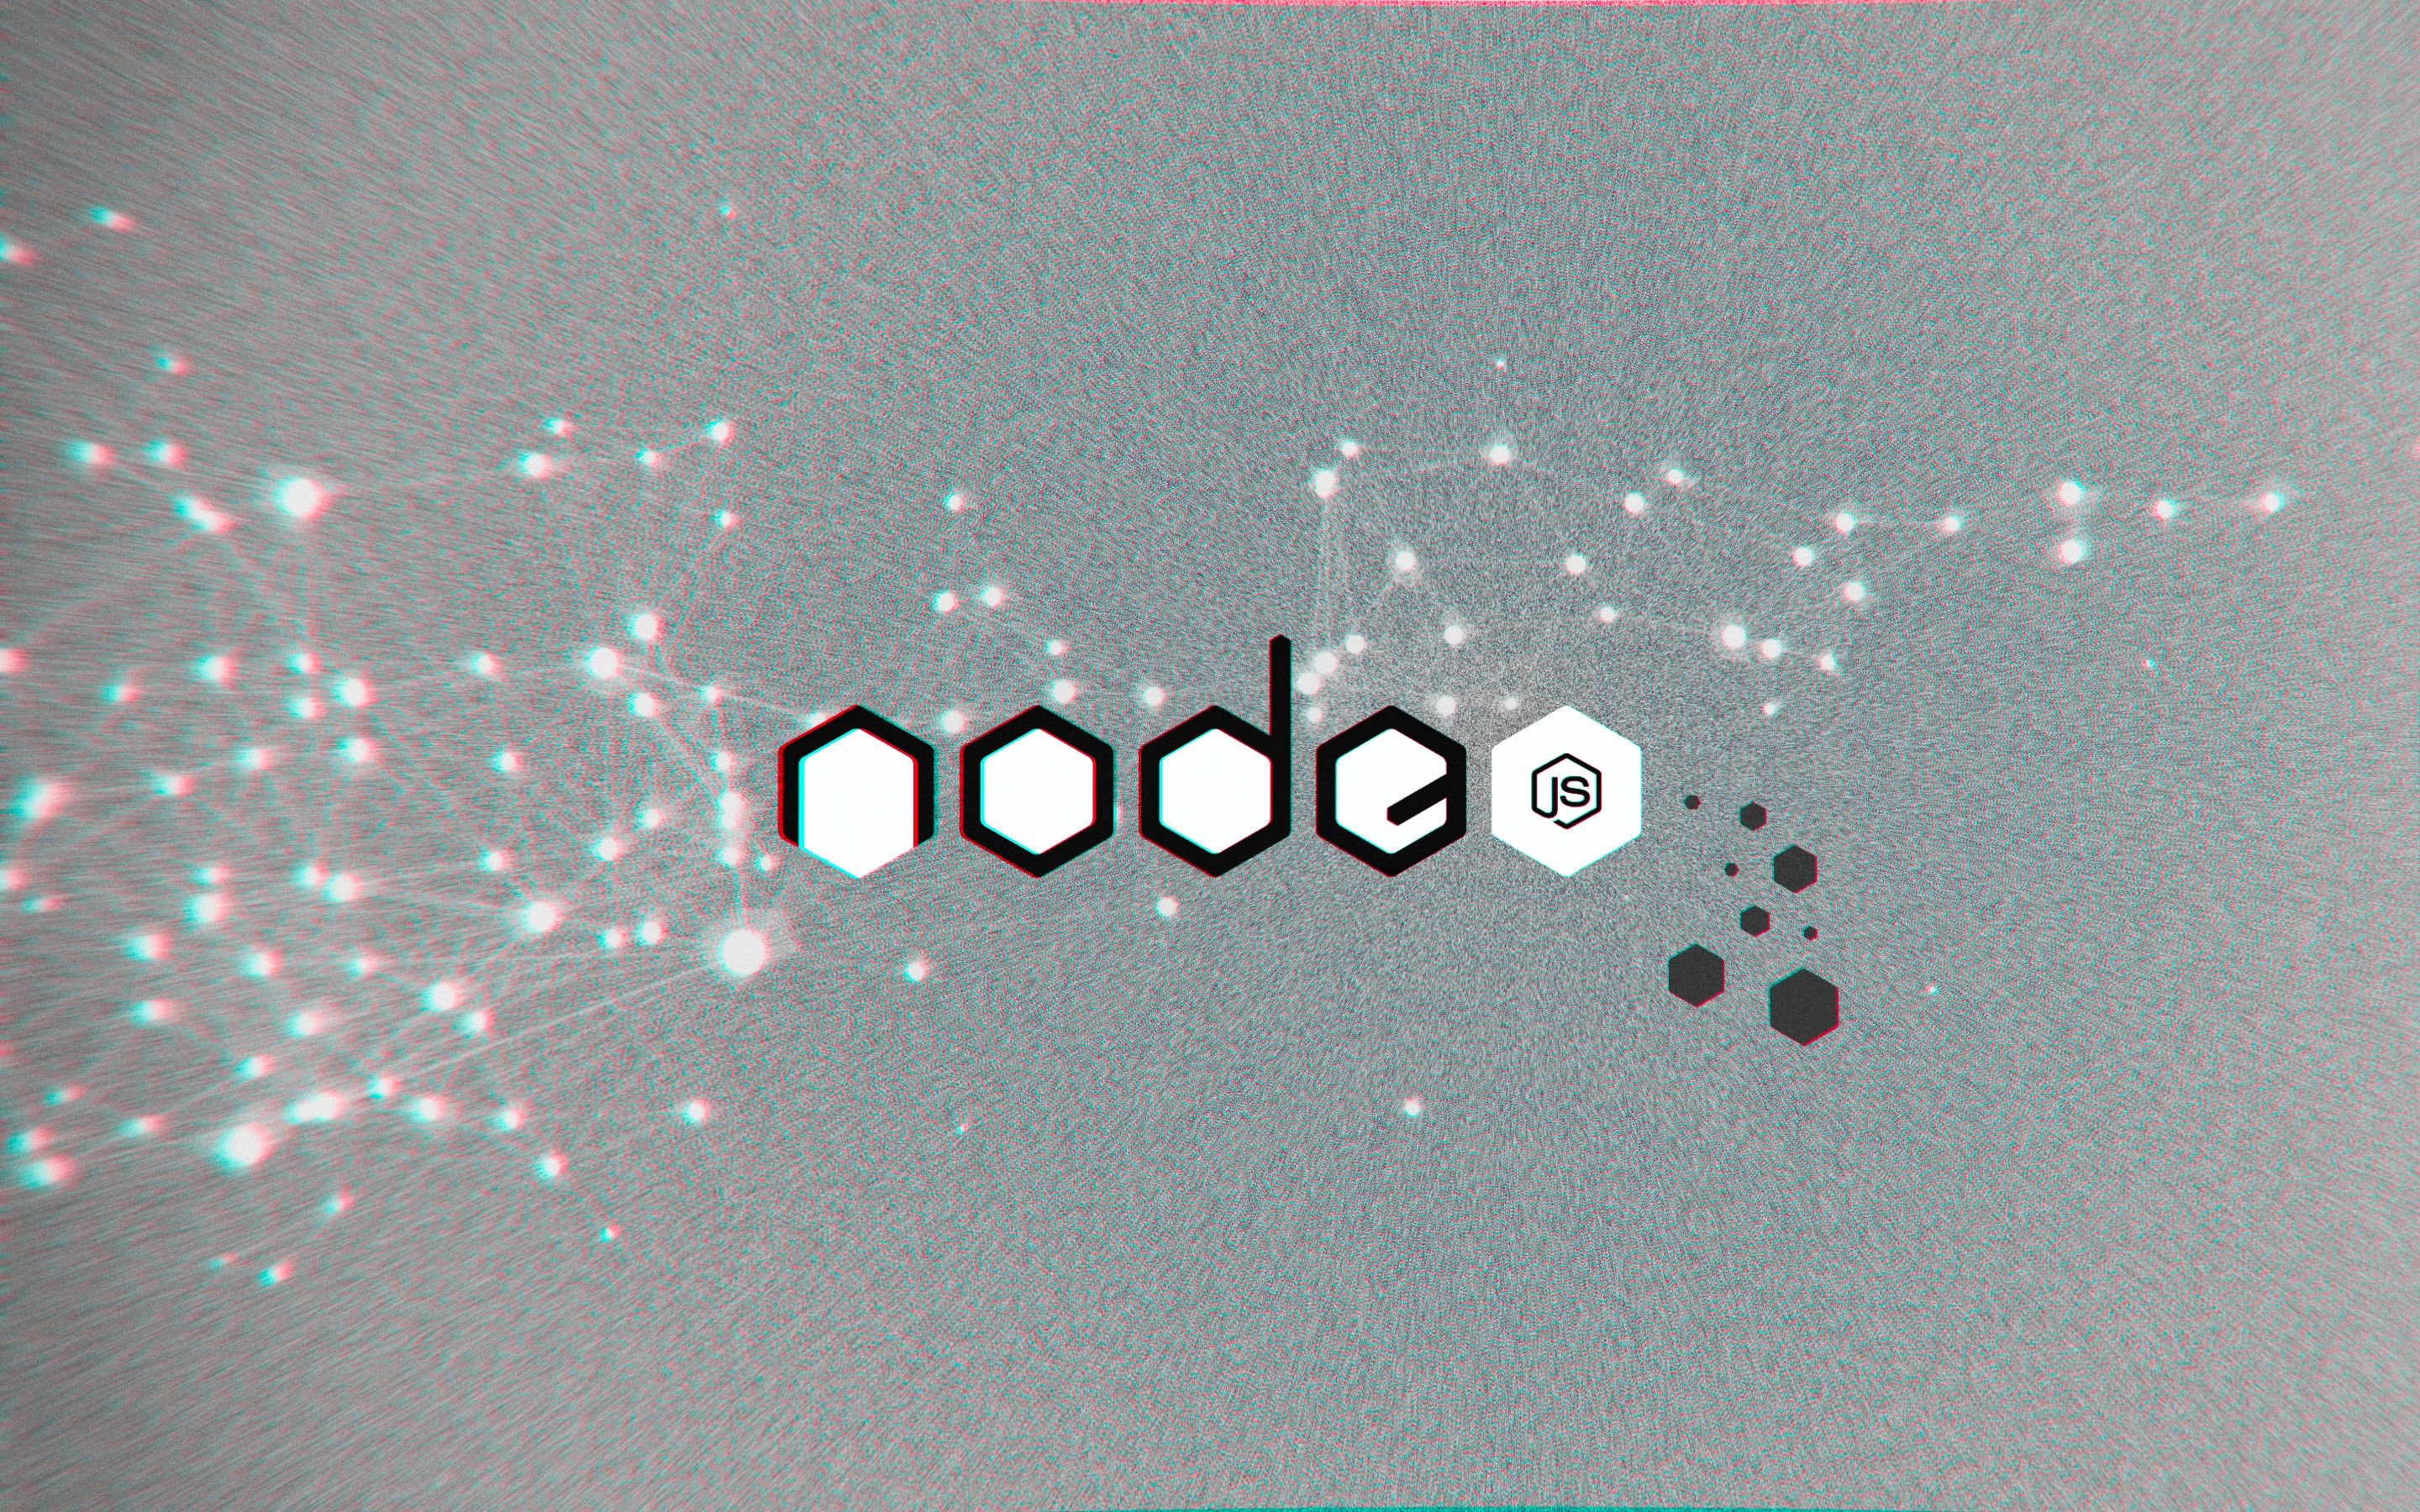 Made some wallpaper with 3 of my nodejs logo proposals. Hope you